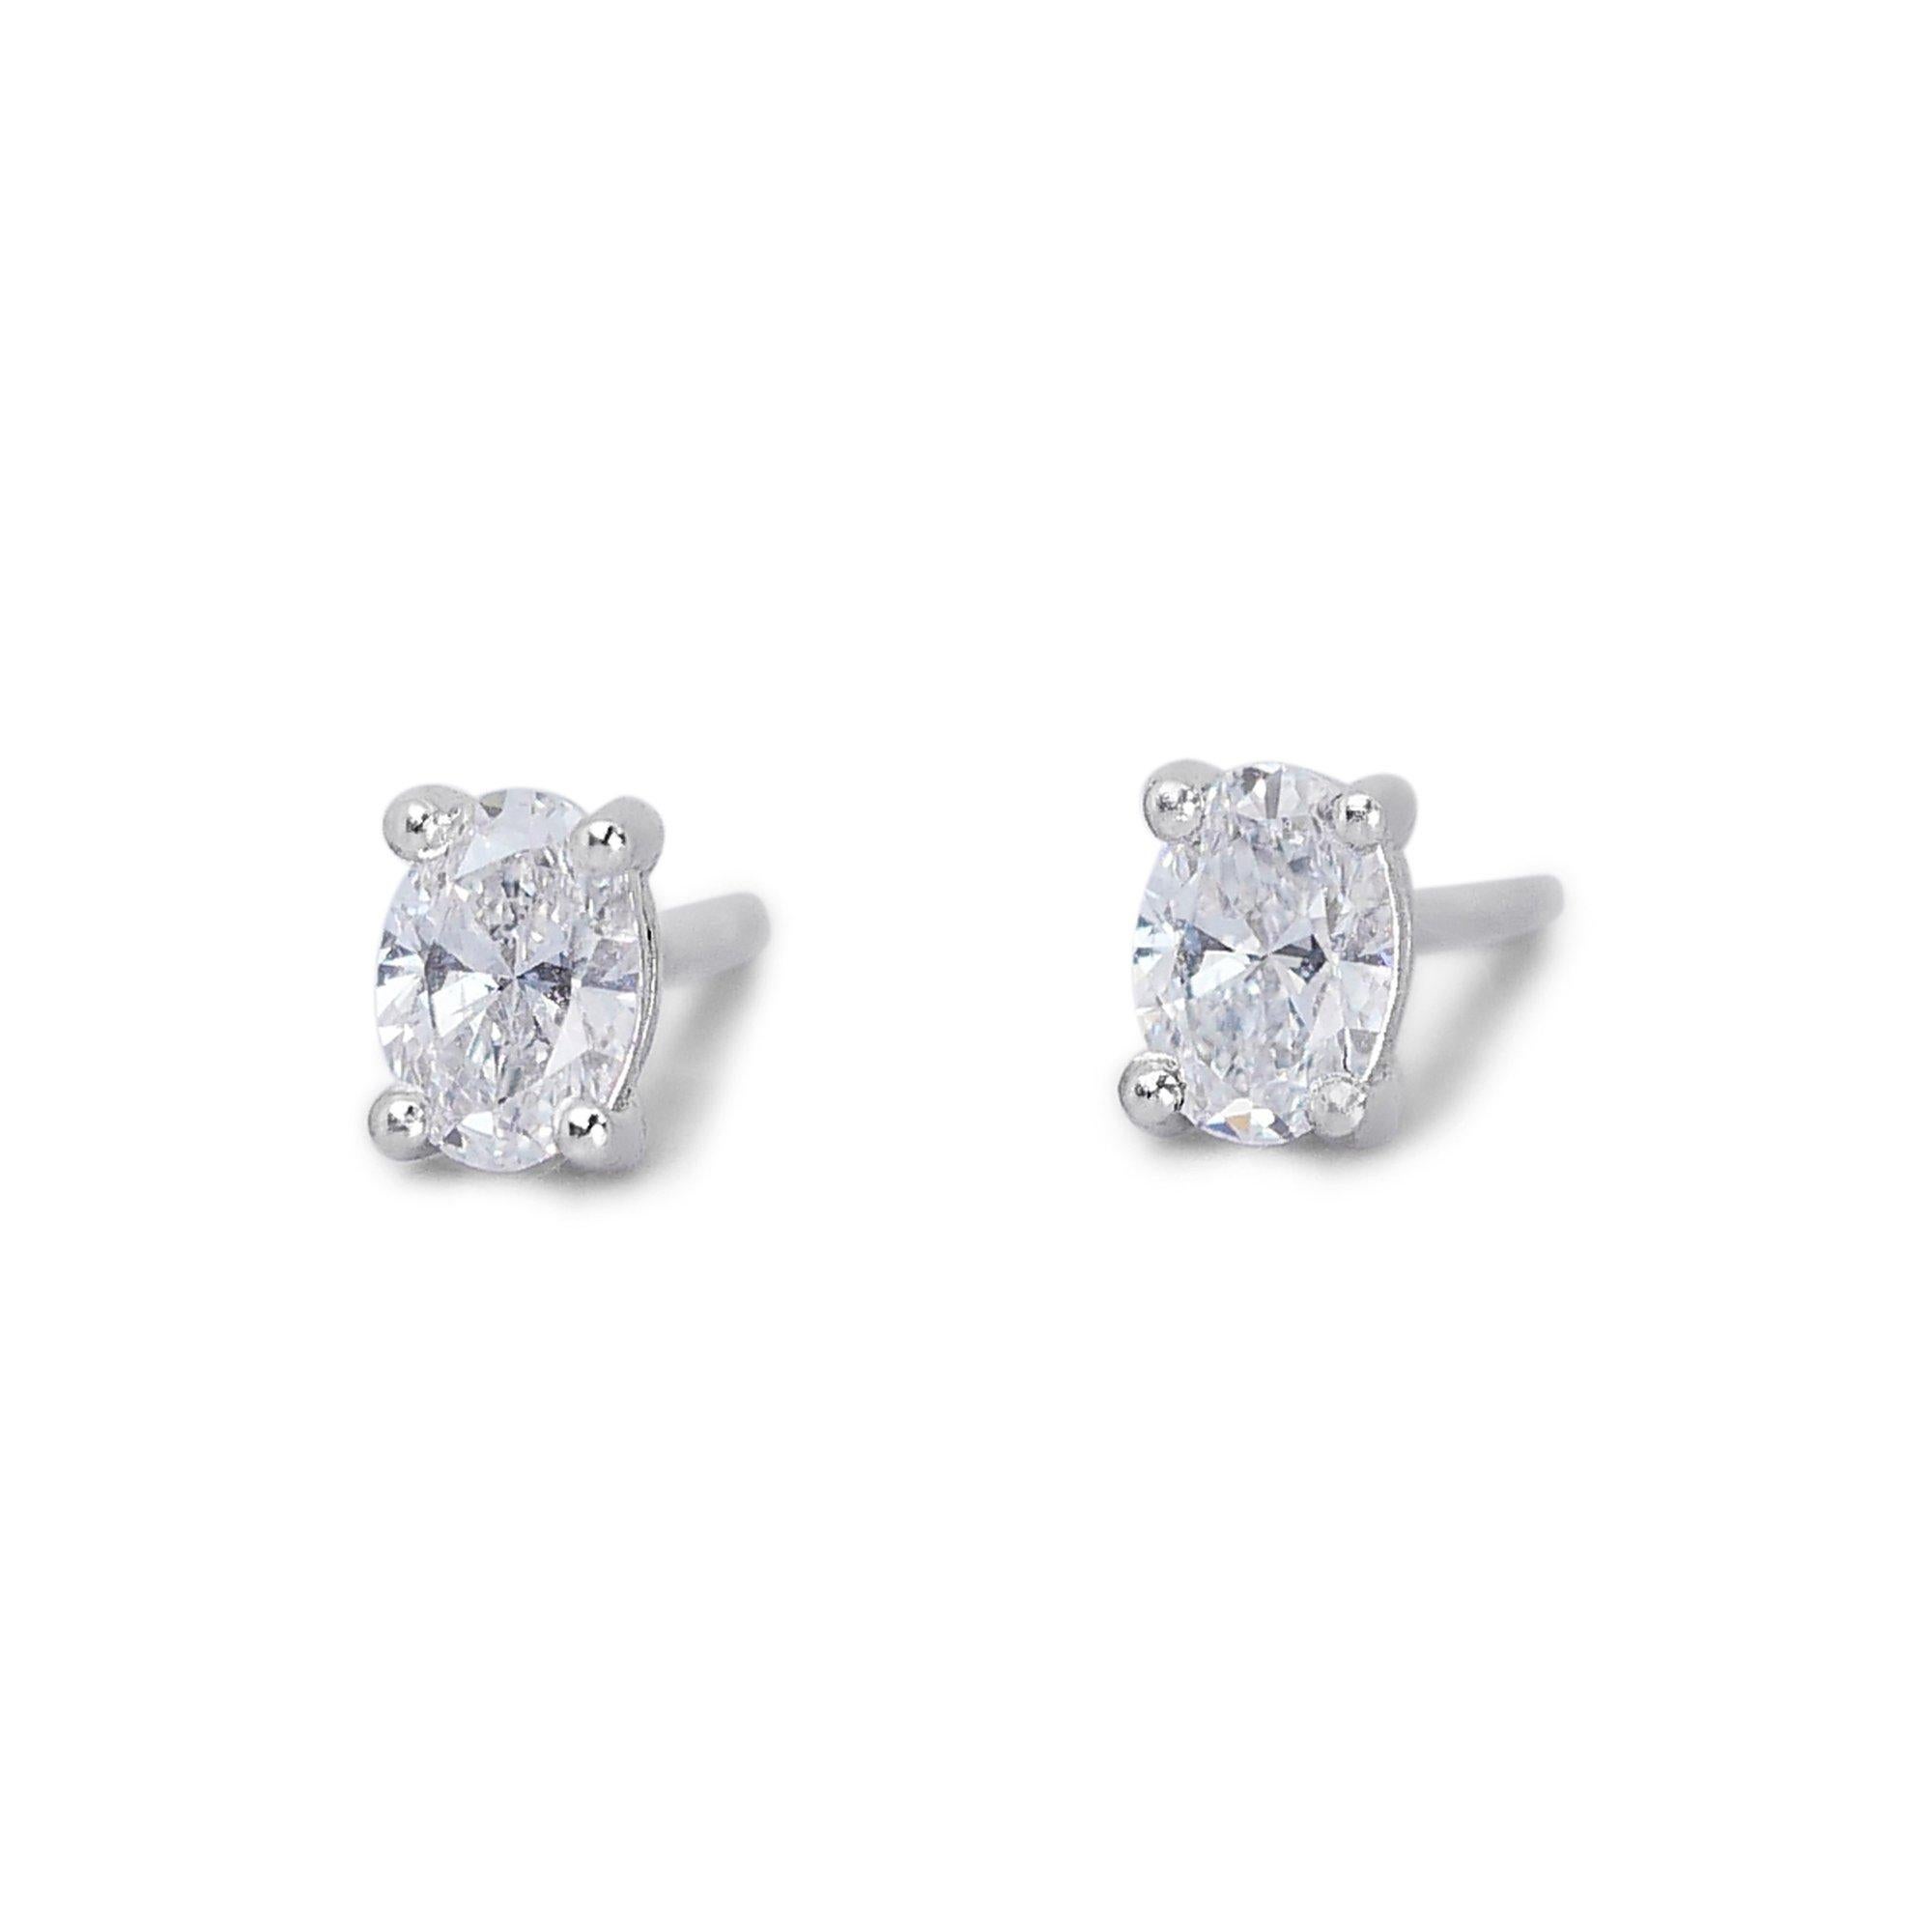 Sparkling 1.82ct Diamond Stud Earrings in 18k White Gold - GIA Certified 

Elevate your style with these exquisite diamond stud earrings crafted in 18k white gold. Each earring features a stunning oval diamond, with a combined total weight of